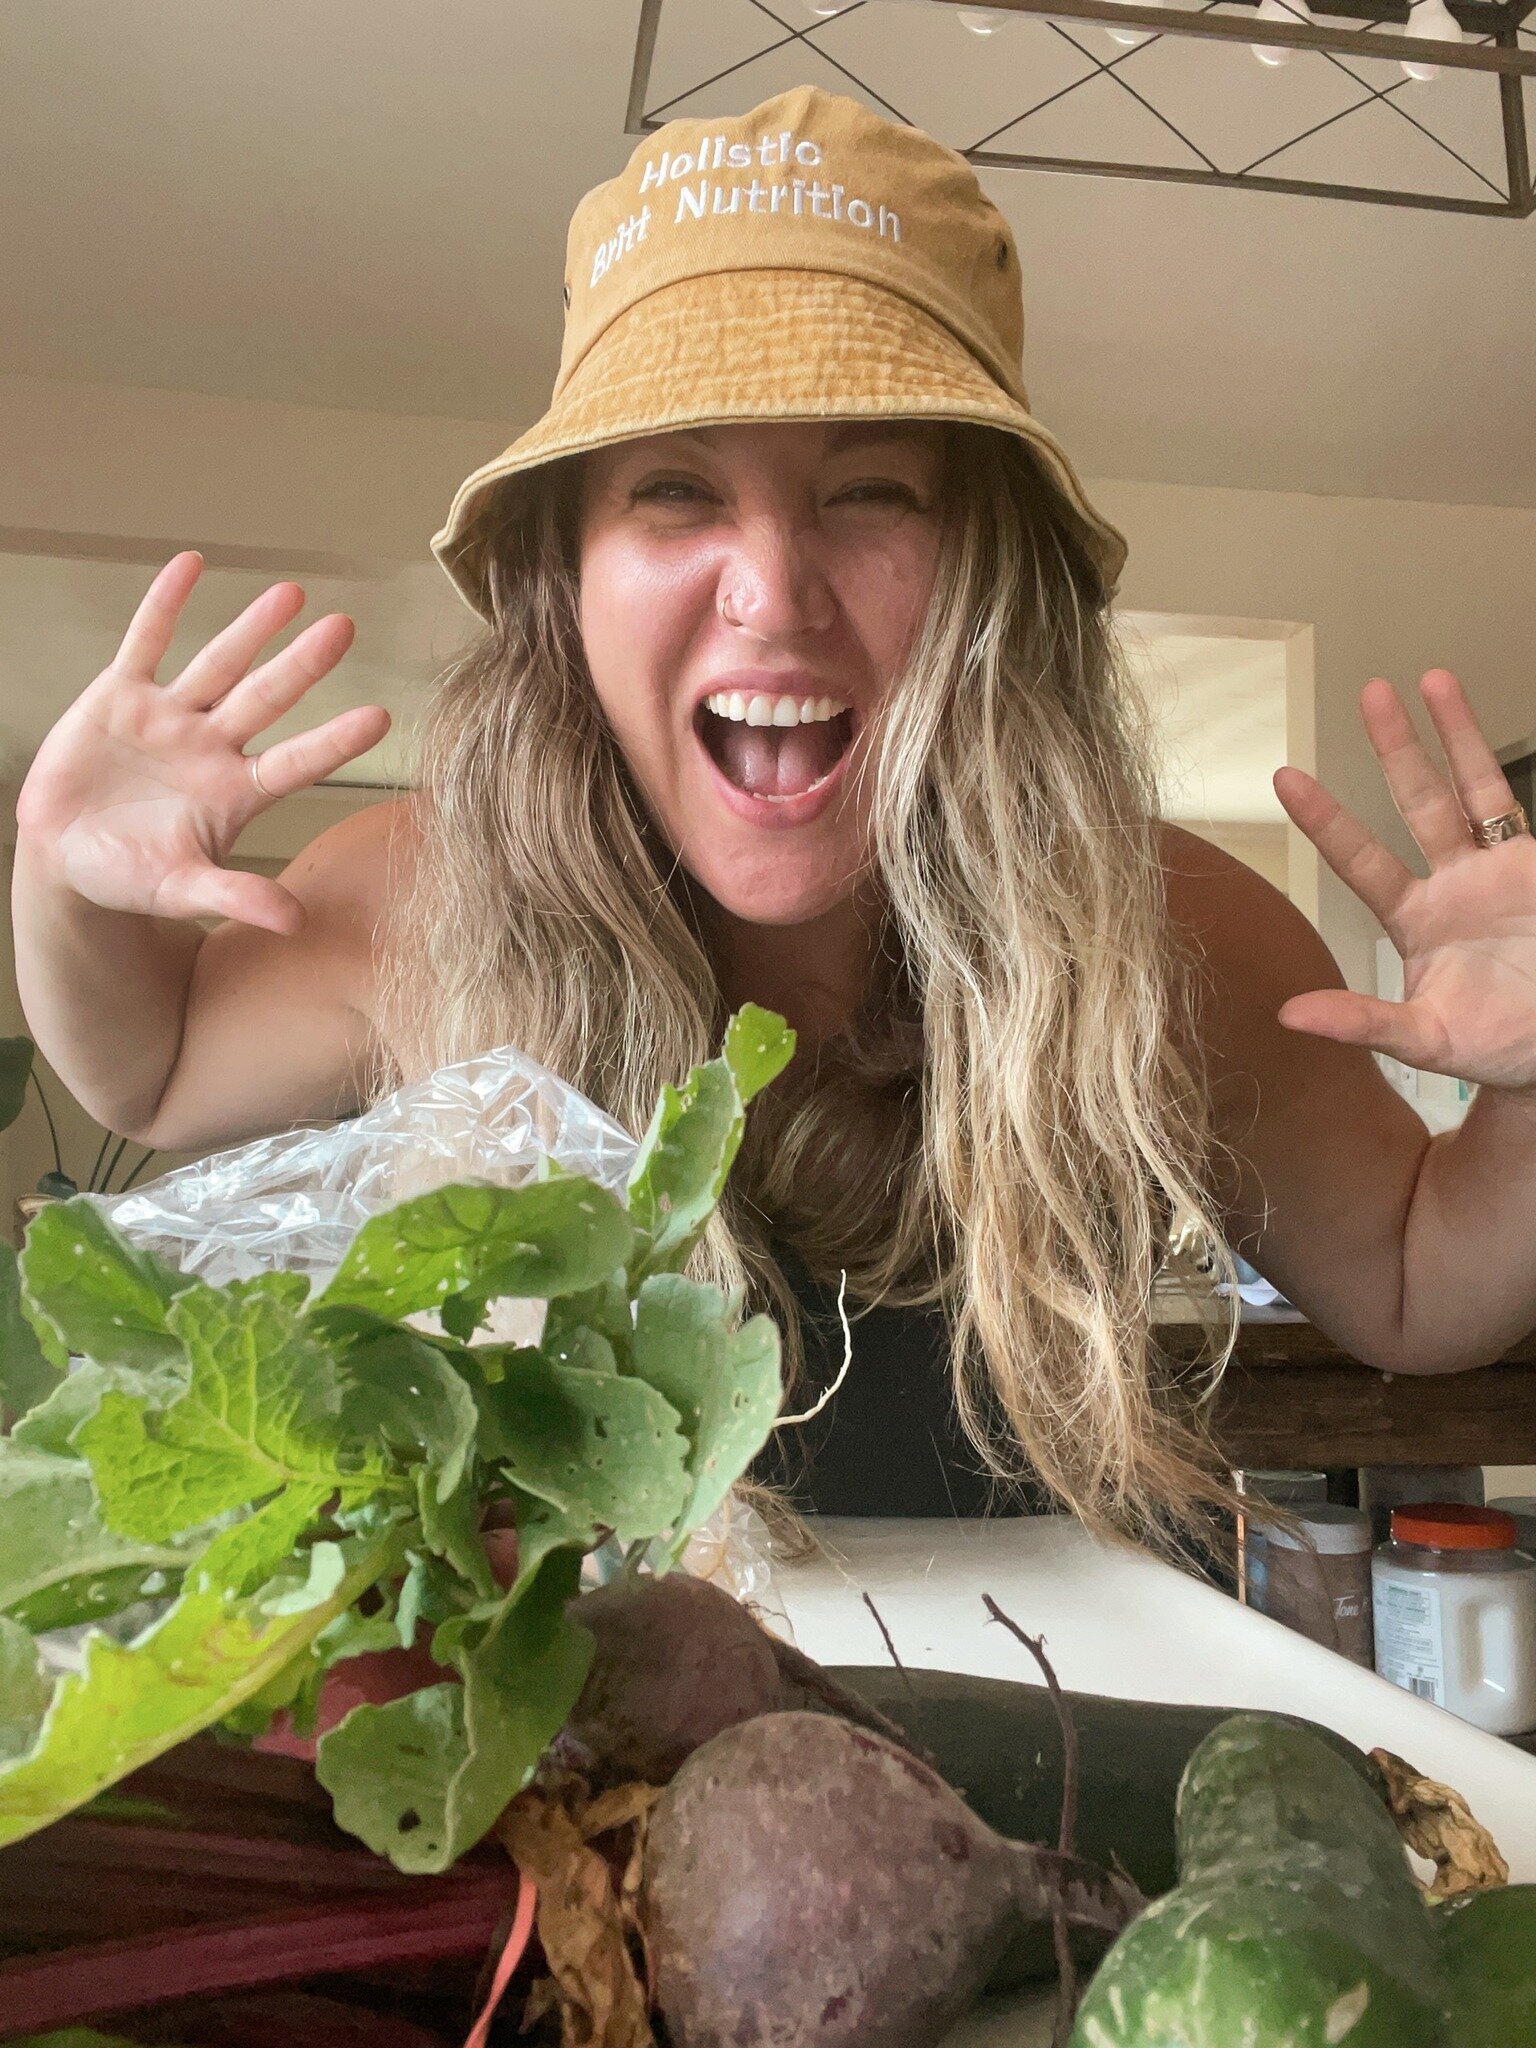 Summer fresh veggie season has me like 🥳🥳🥳

Inside the Summer Thrive 30-day Nutrition program we're making it easy to include summer fresh produce like the good stuff in this photo by... 

✔️Filling your plate with veggies first
✔️Try some new rec